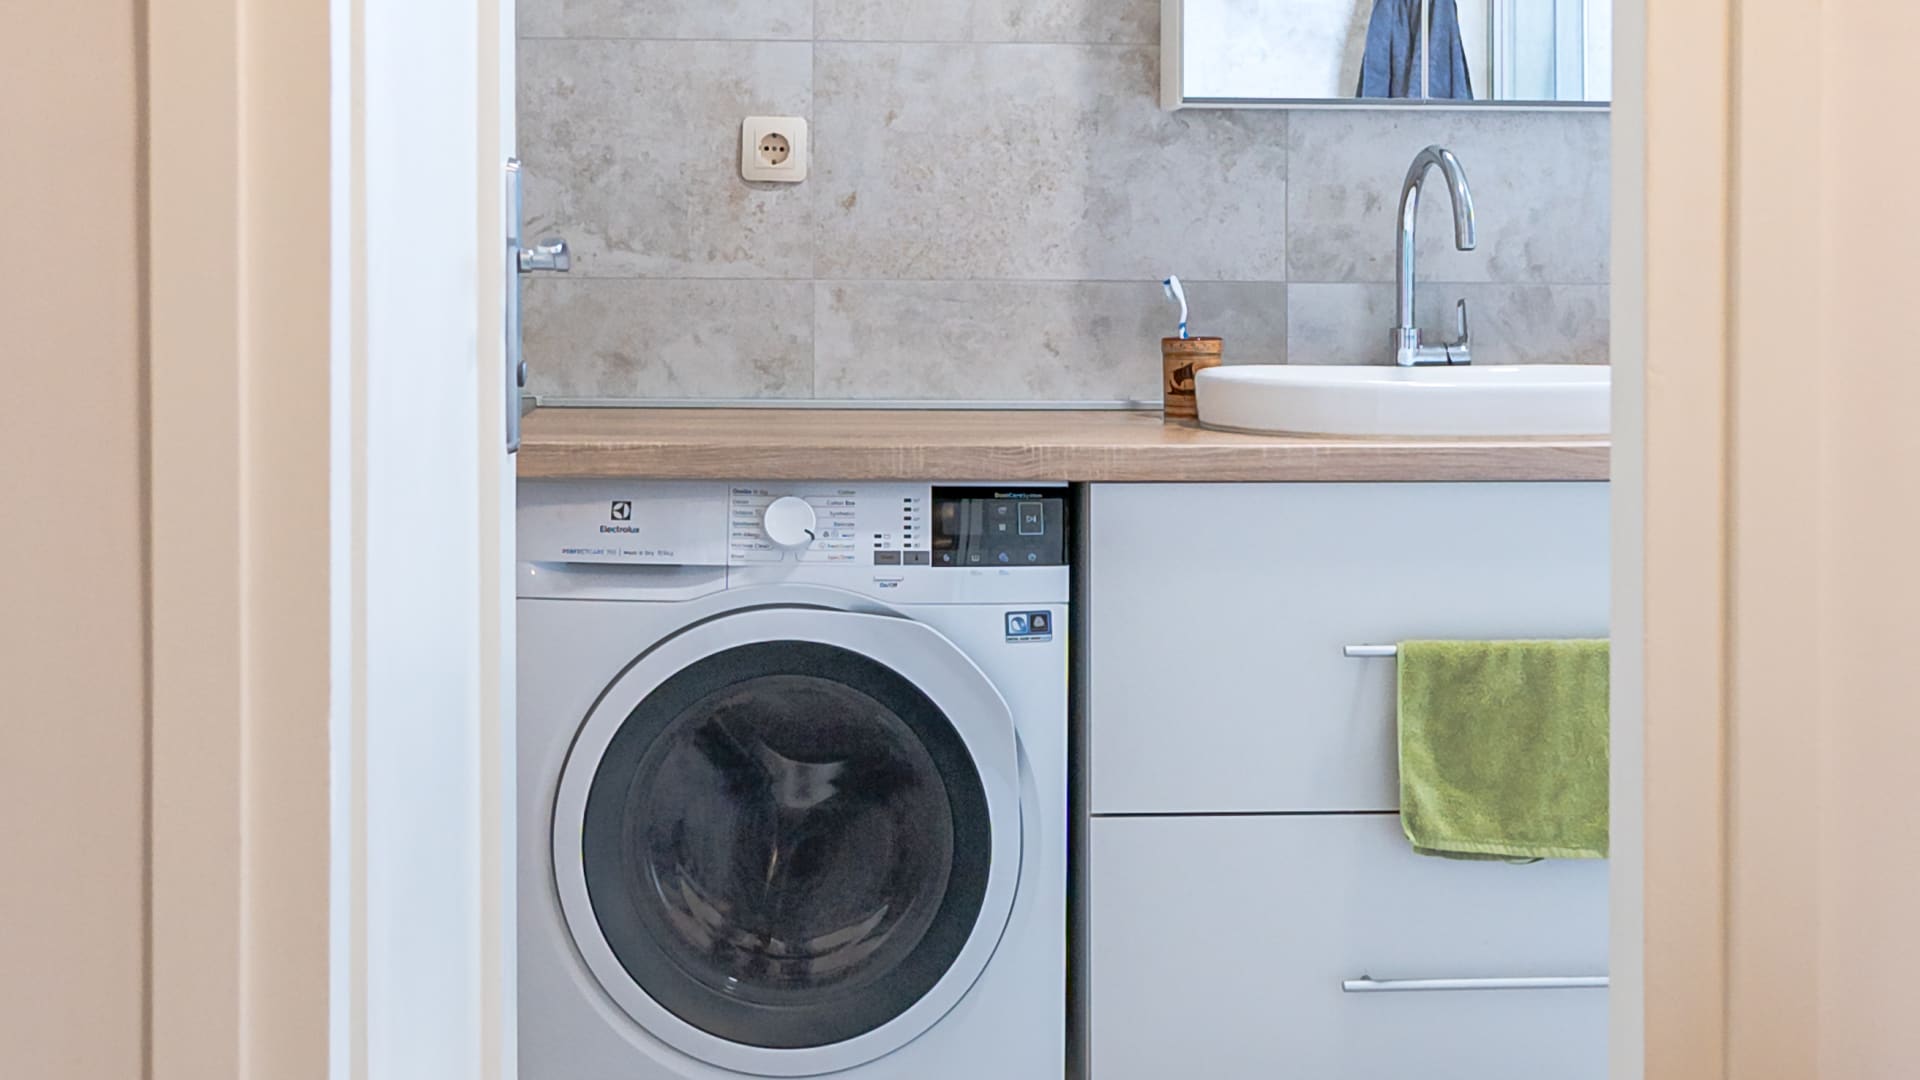 The washer and dryer unit in the bathroom is a game-changer.